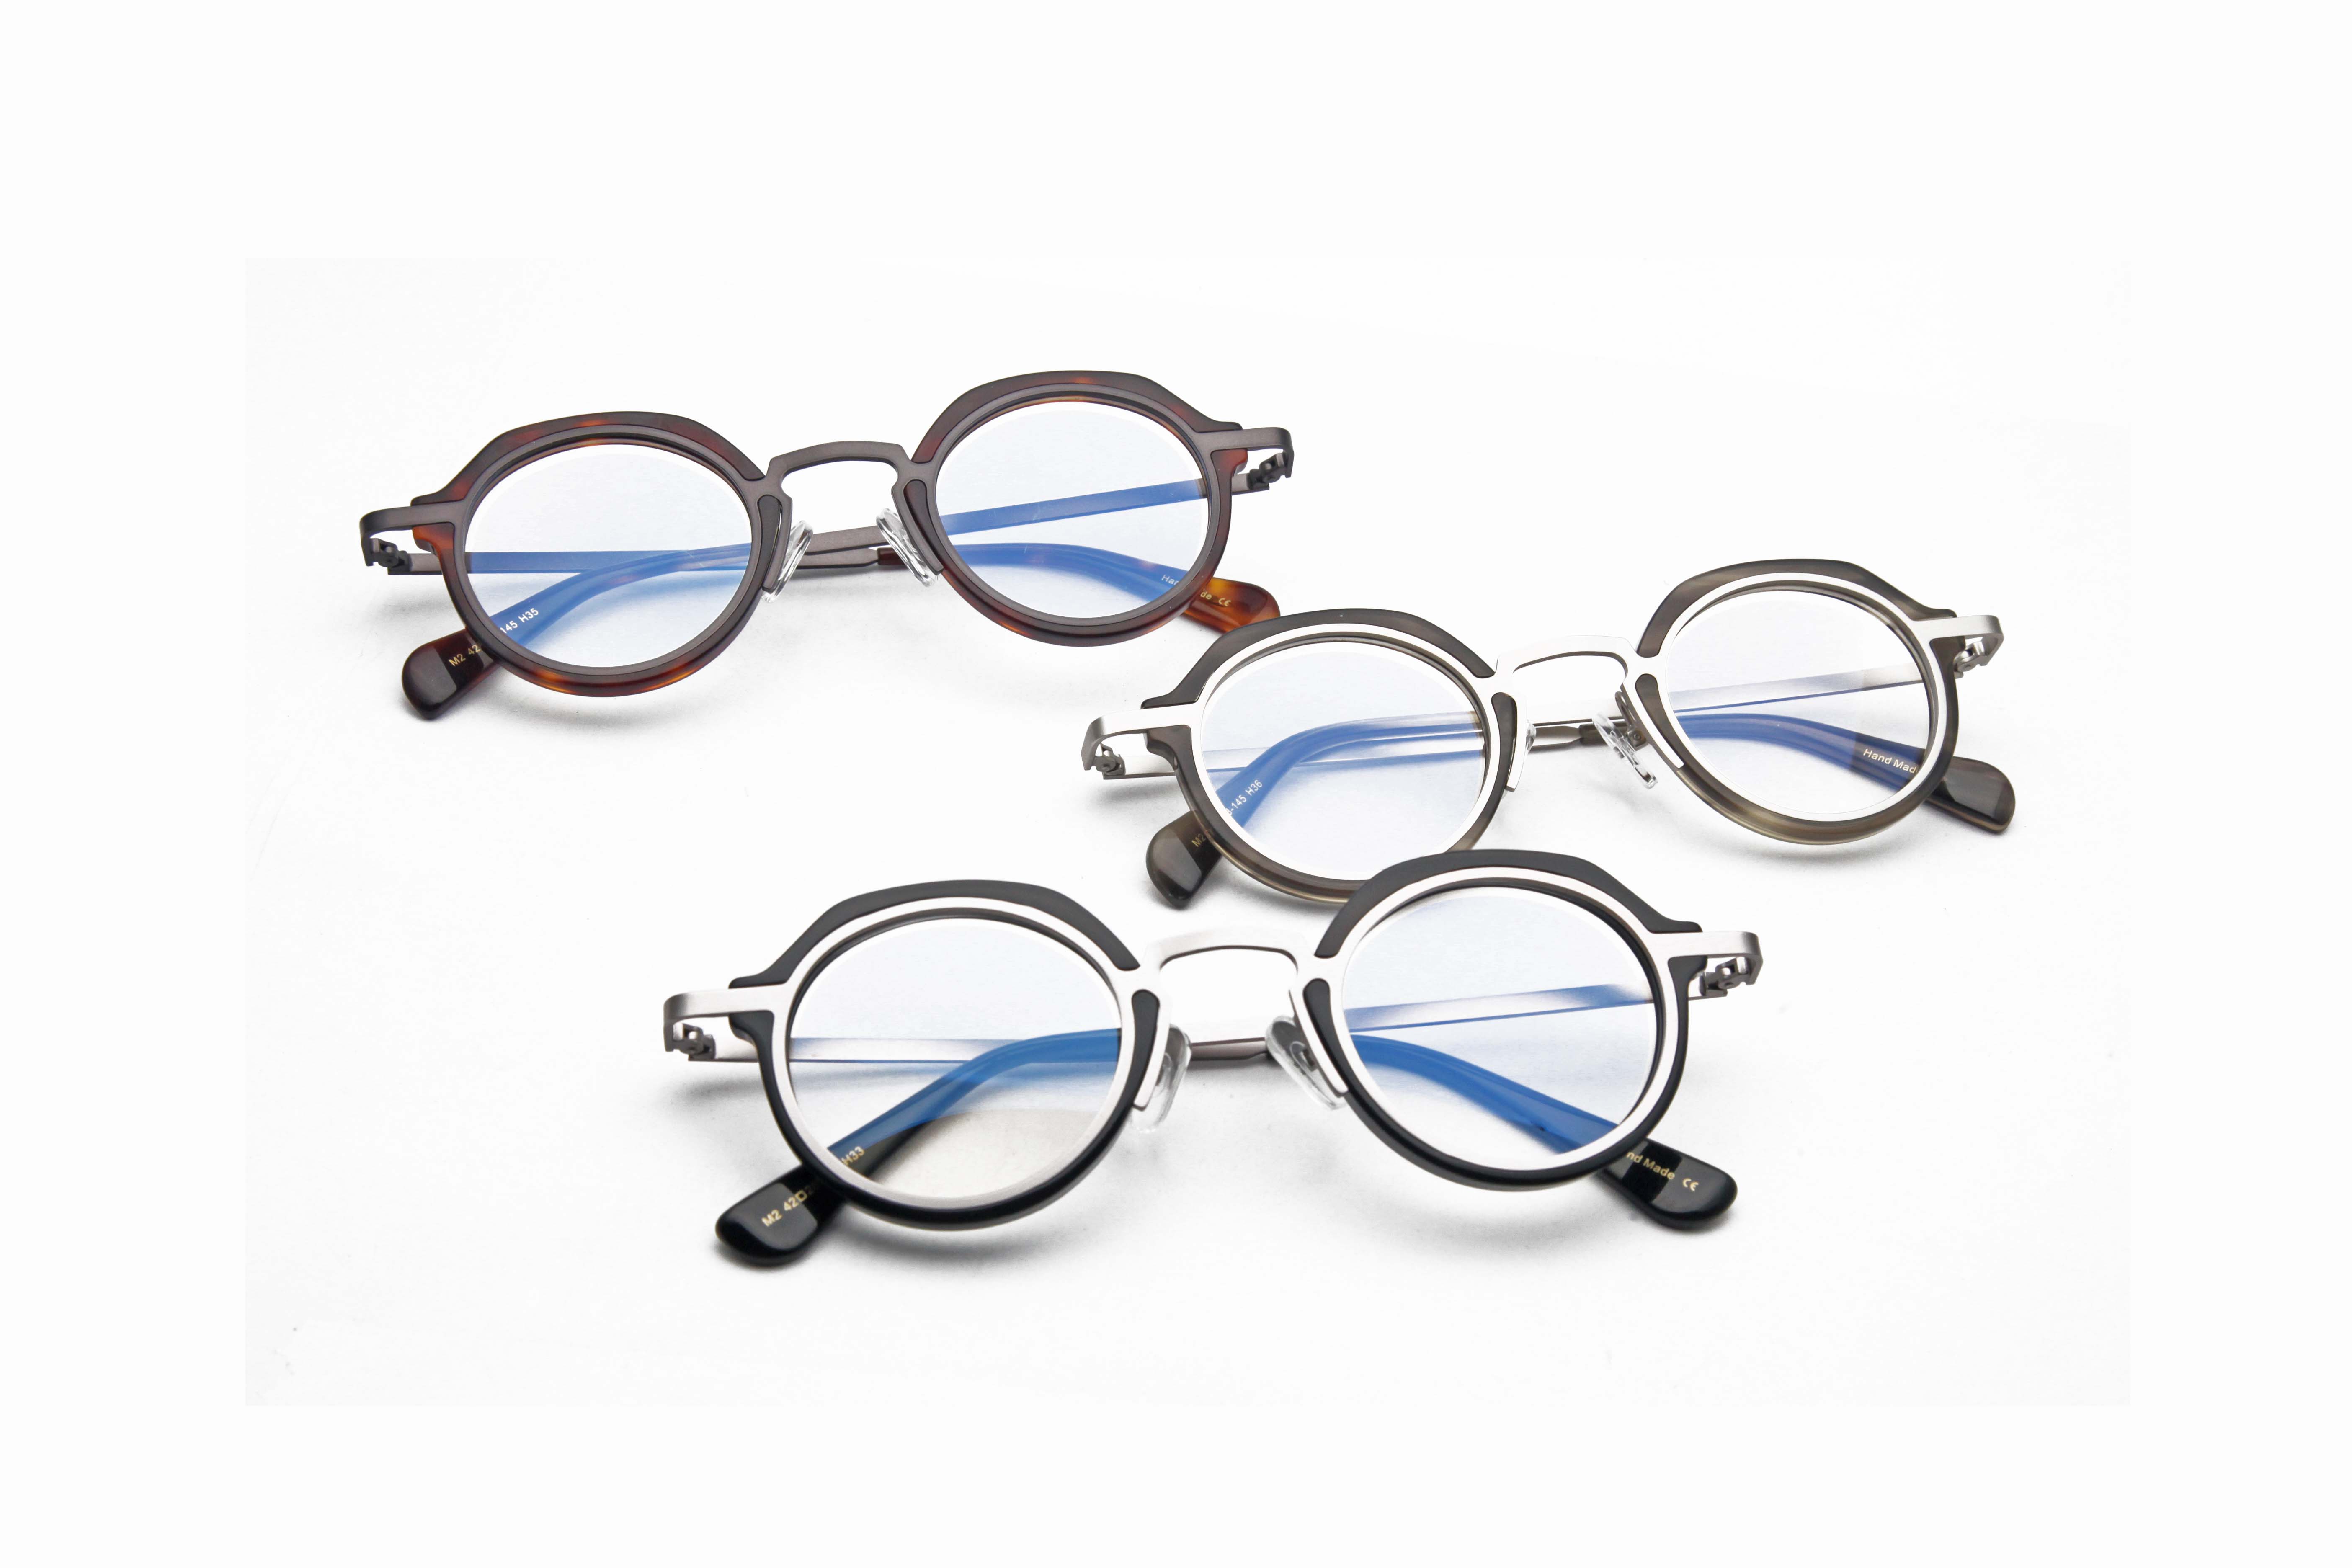 Discover the World of Luxury with Our Latest High-End Optical Eyewear